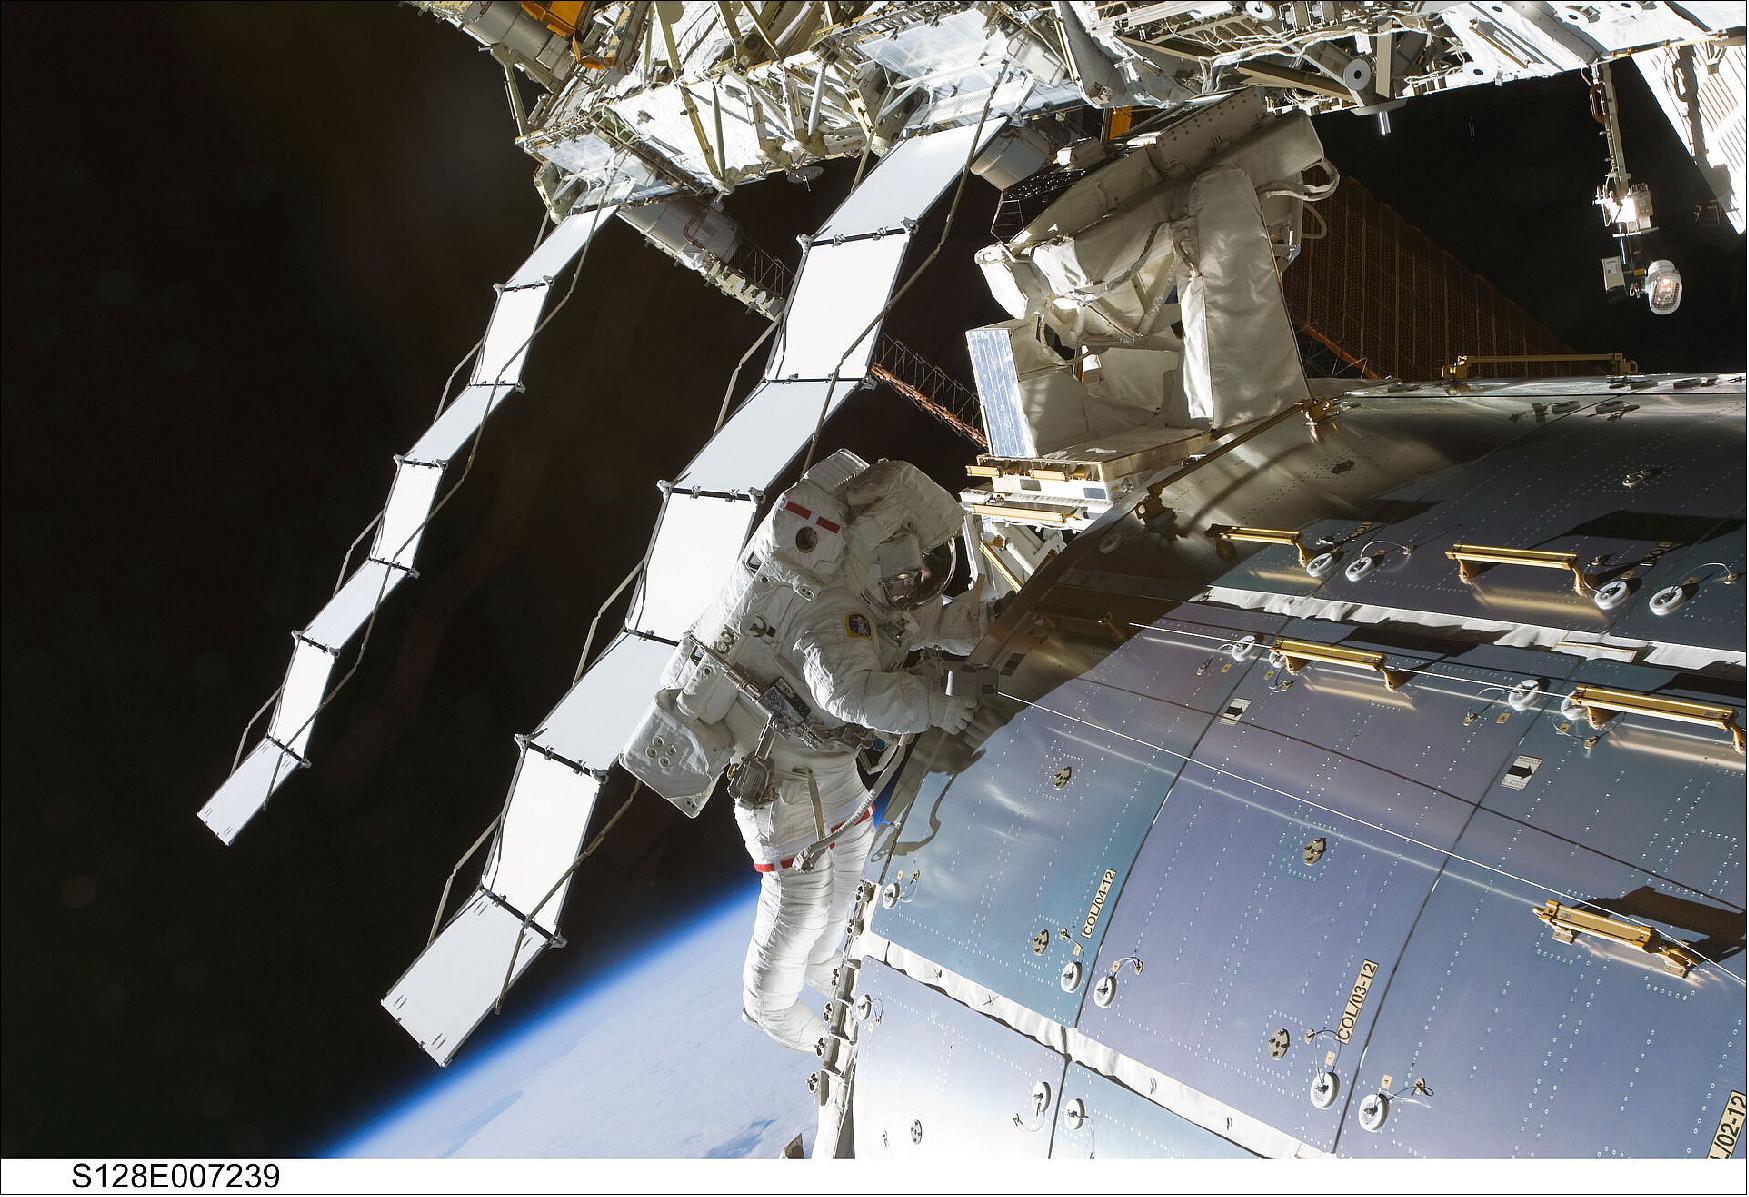 Figure 2: In May 2013, ammonia radiators were installed on Station. NASA Astronaut Nicole Stott, Expedition 20 flight engineer, during a six-hour spacewalk. Nicole and NASA astronaut John Olivas removed an empty ammonia tank from the Station and retrieved the European Technology Exposure Facility and Materials International Space Station Experiment from outside ESA’s Columbus laboratory module and installed them in Space Shuttle Discovery for return to Earth. - The white ammonia-cooled radiators can be seen in the background (image credit: ESA, CC BY-SA 3.0 IGO) 2)